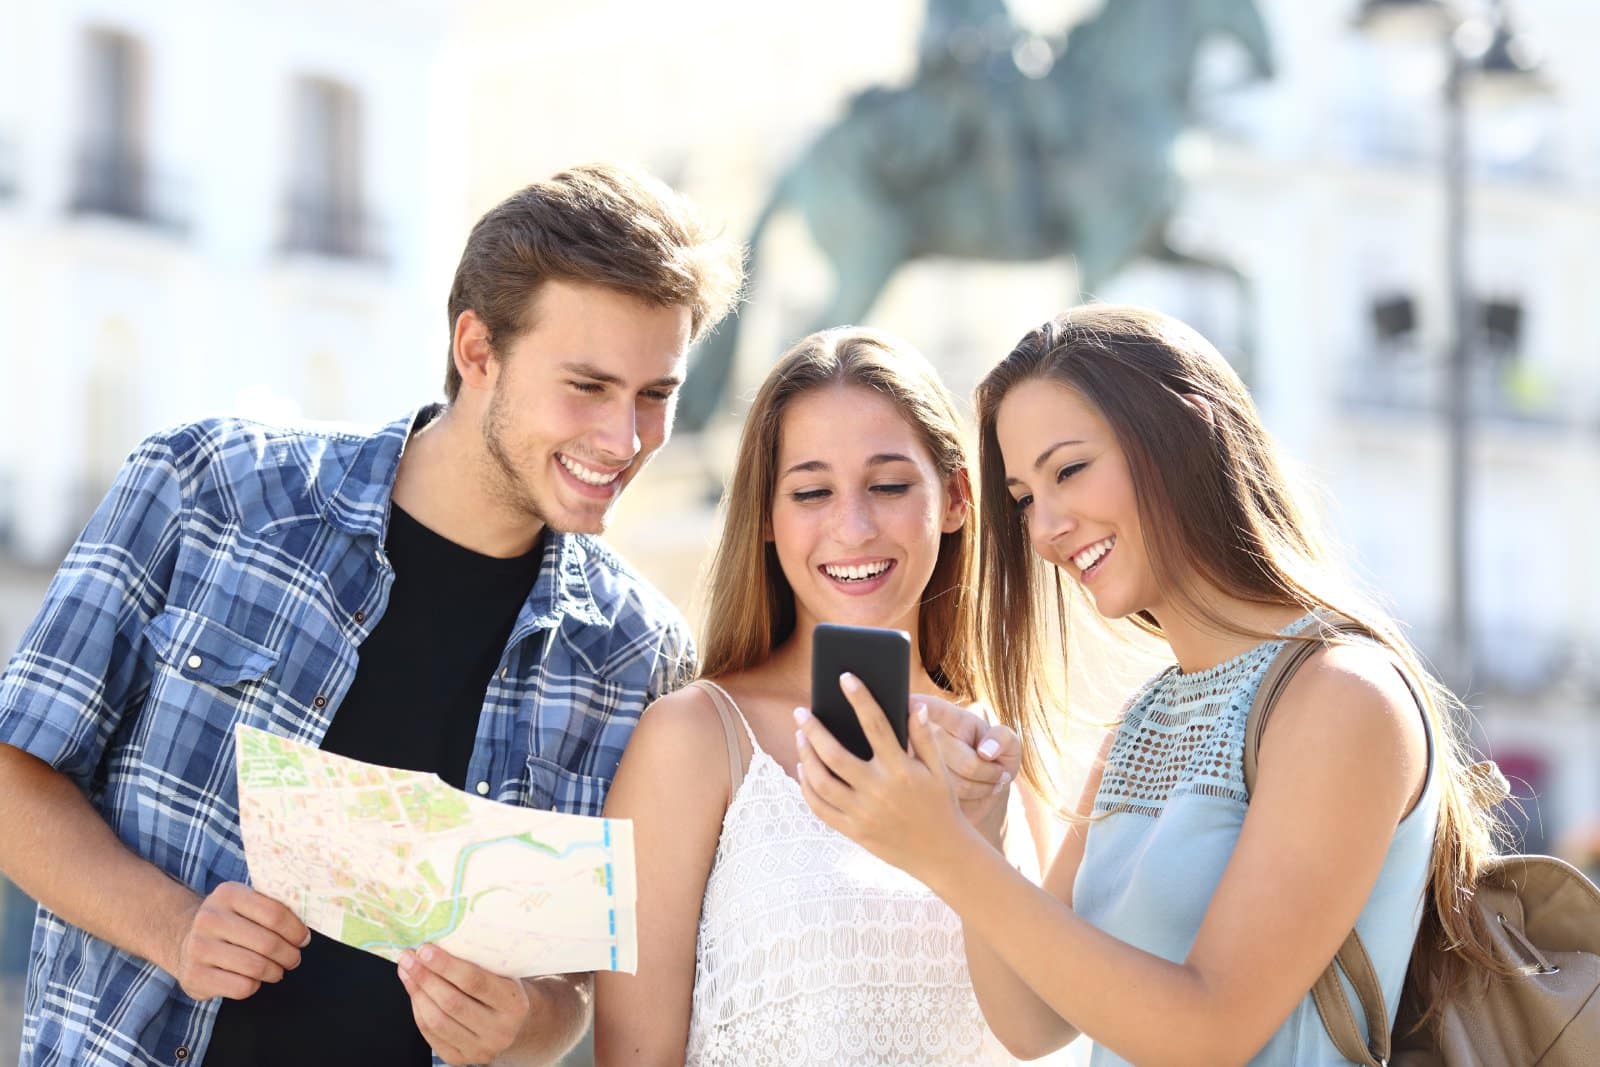 <p class="wp-caption-text">Image Credit: Shutterstock / Antonio Guillem</p>  <p><span>Encounters with fraudulent ticket sellers and tour operators can quickly dampen the excitement of exploring renowned attractions. These scammers exploit the eagerness of tourists, selling tickets or tours that are invalid, overpriced, or vastly different from what was promised. </span></p>